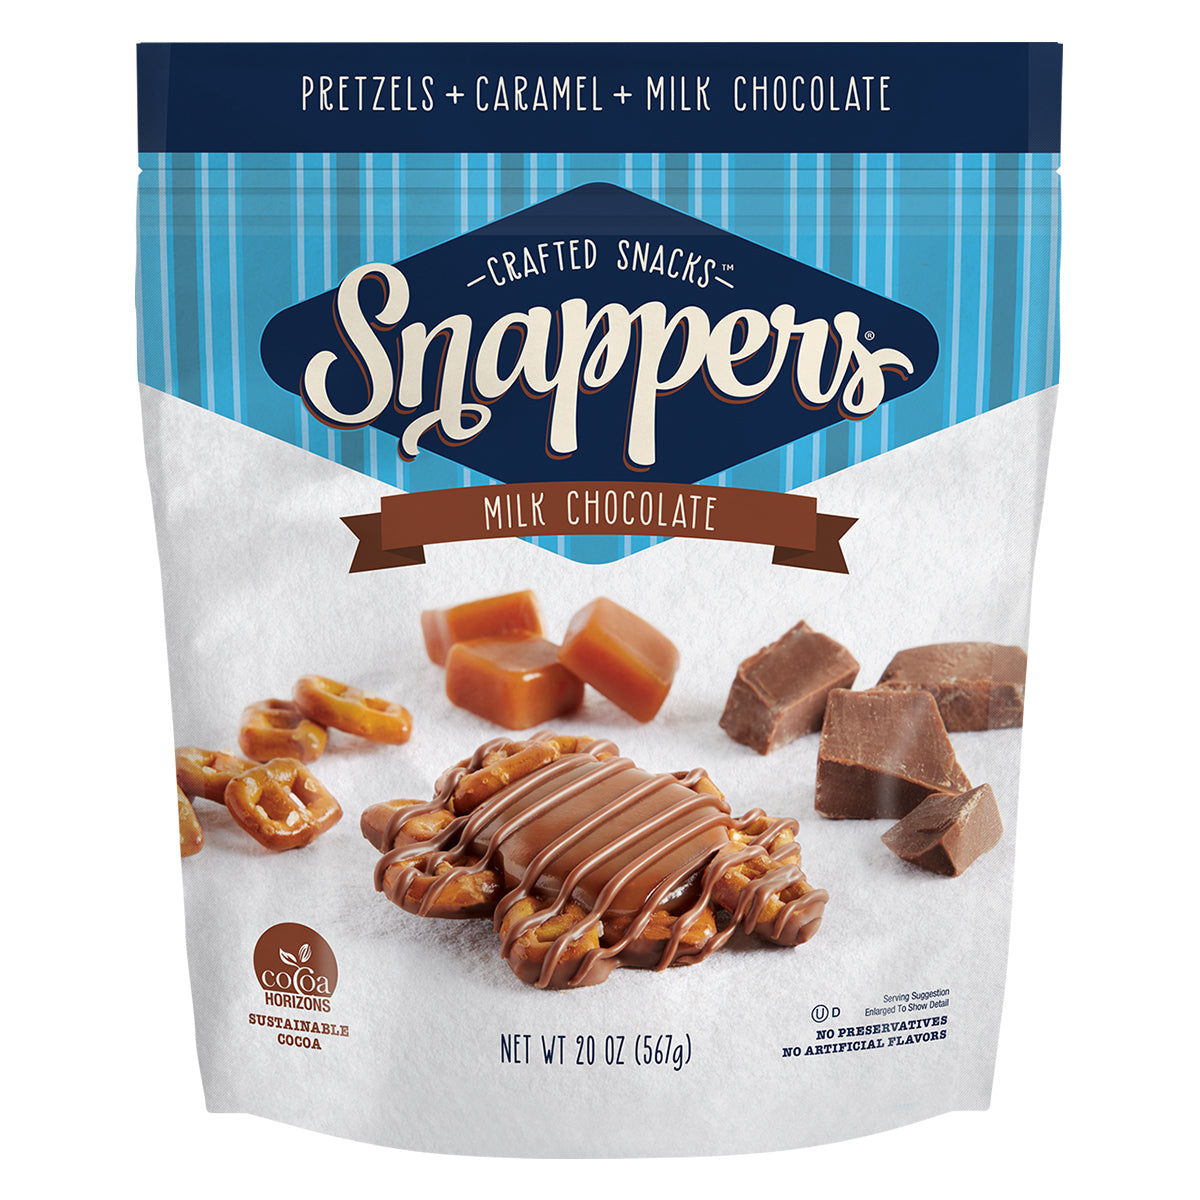 Snappers Milk Chocolate and Caramel Pretzels, 567g Snacks Costco UK   